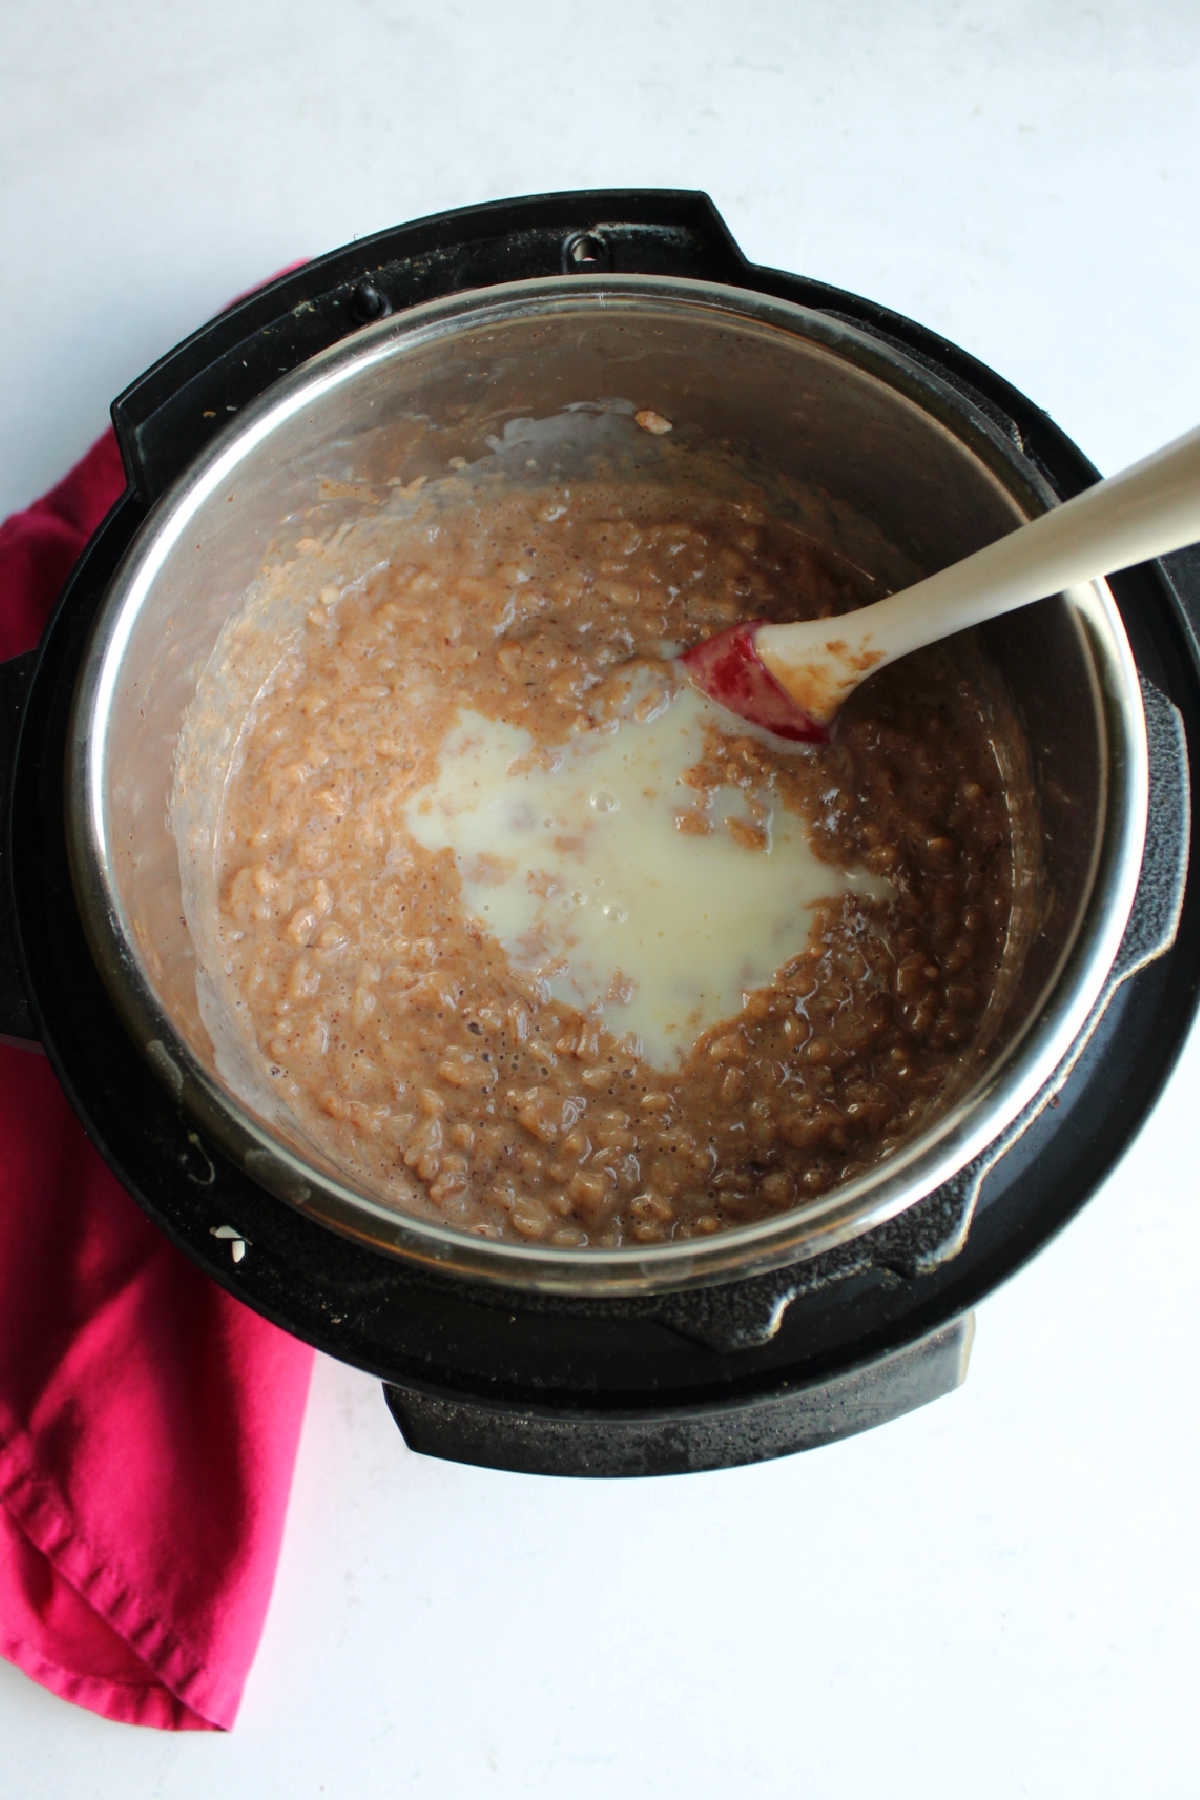 Cooked rice, milk and cocoa mixture in instant pot with condensed milk ready to be stirred in.